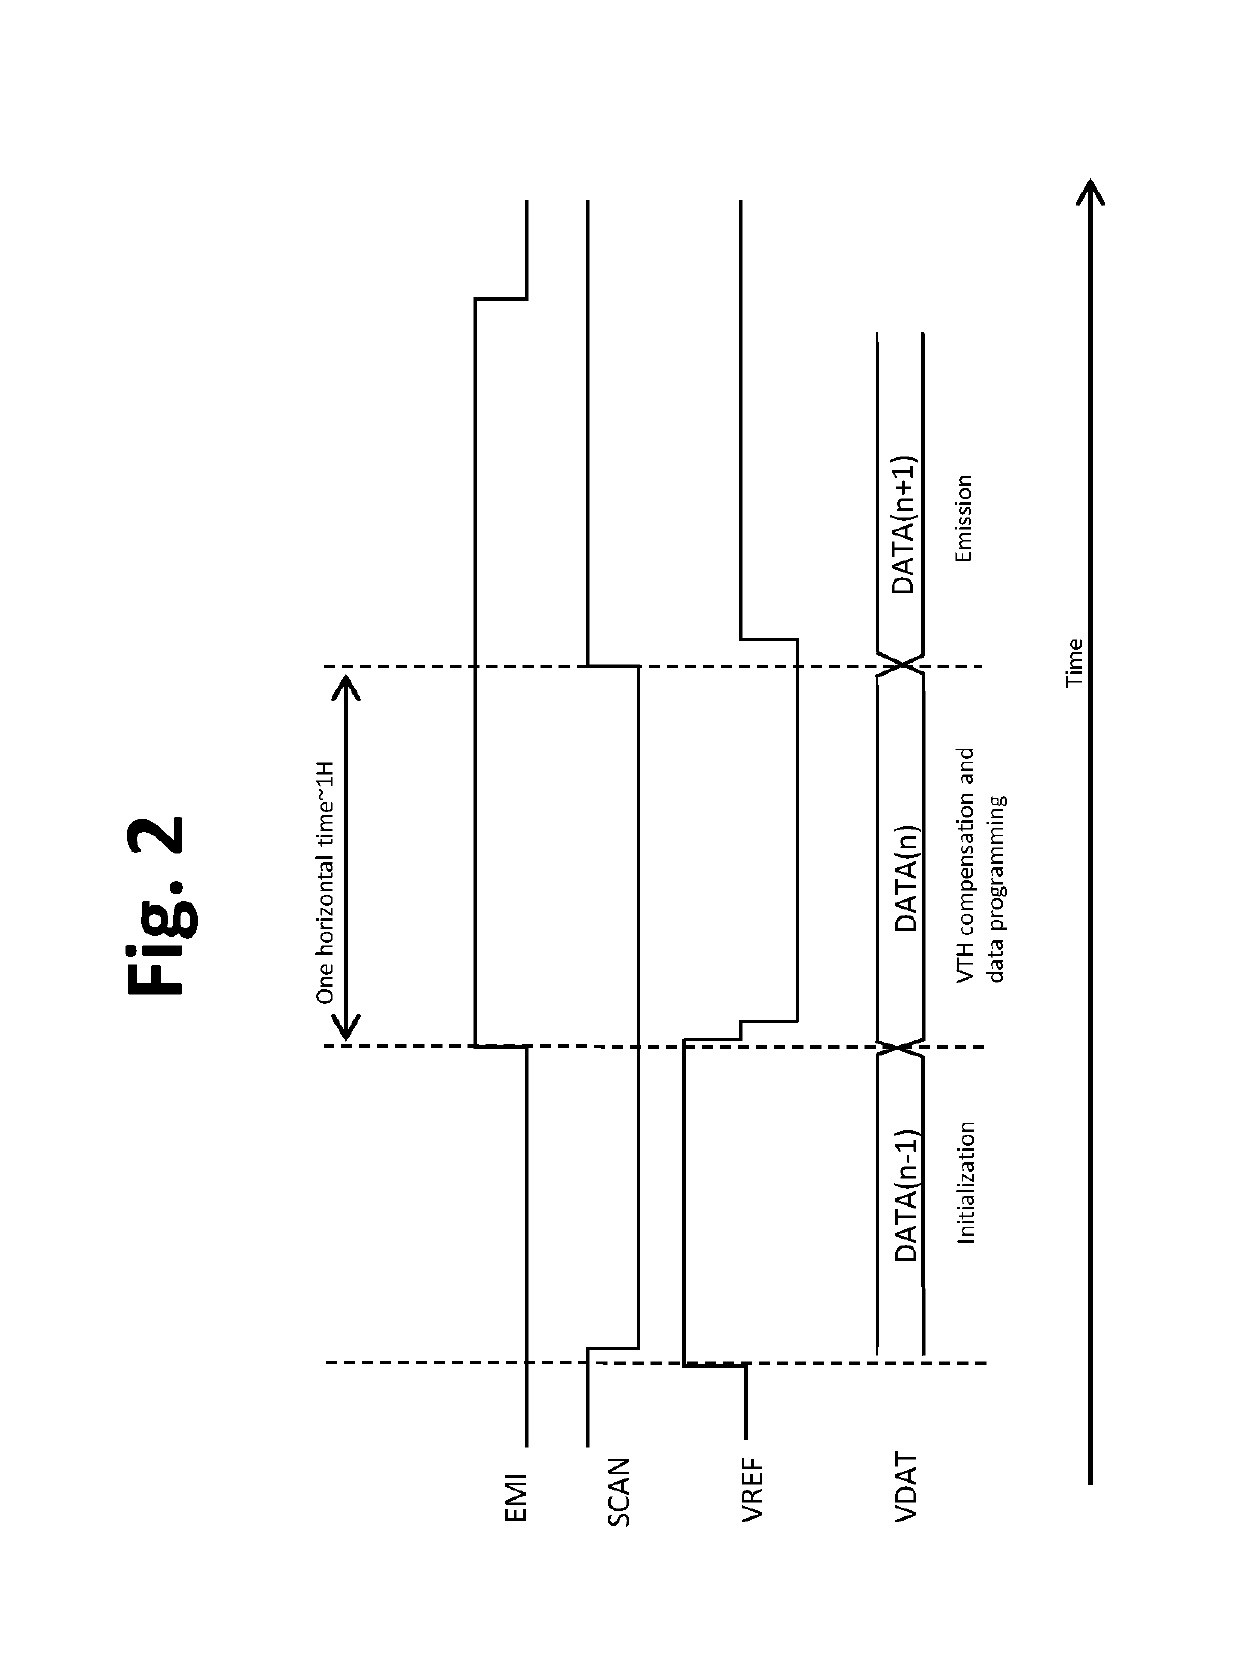 TFT pixel threshold voltage compensation circuit with data voltage applied at light-emitting device